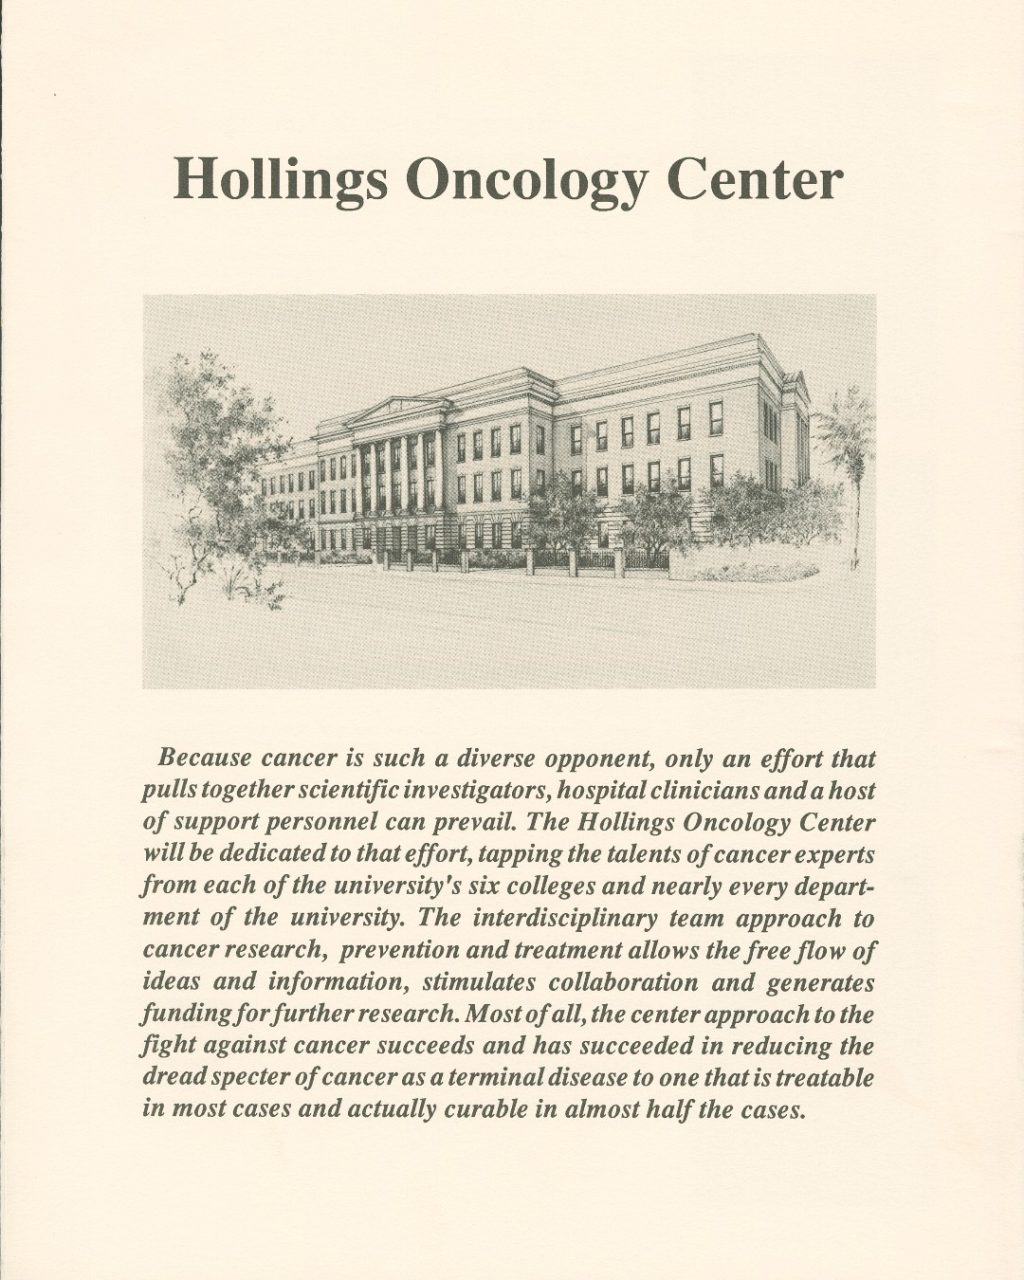 30 years ago today, we put our mission into action – MUSC Hollings Cancer Center